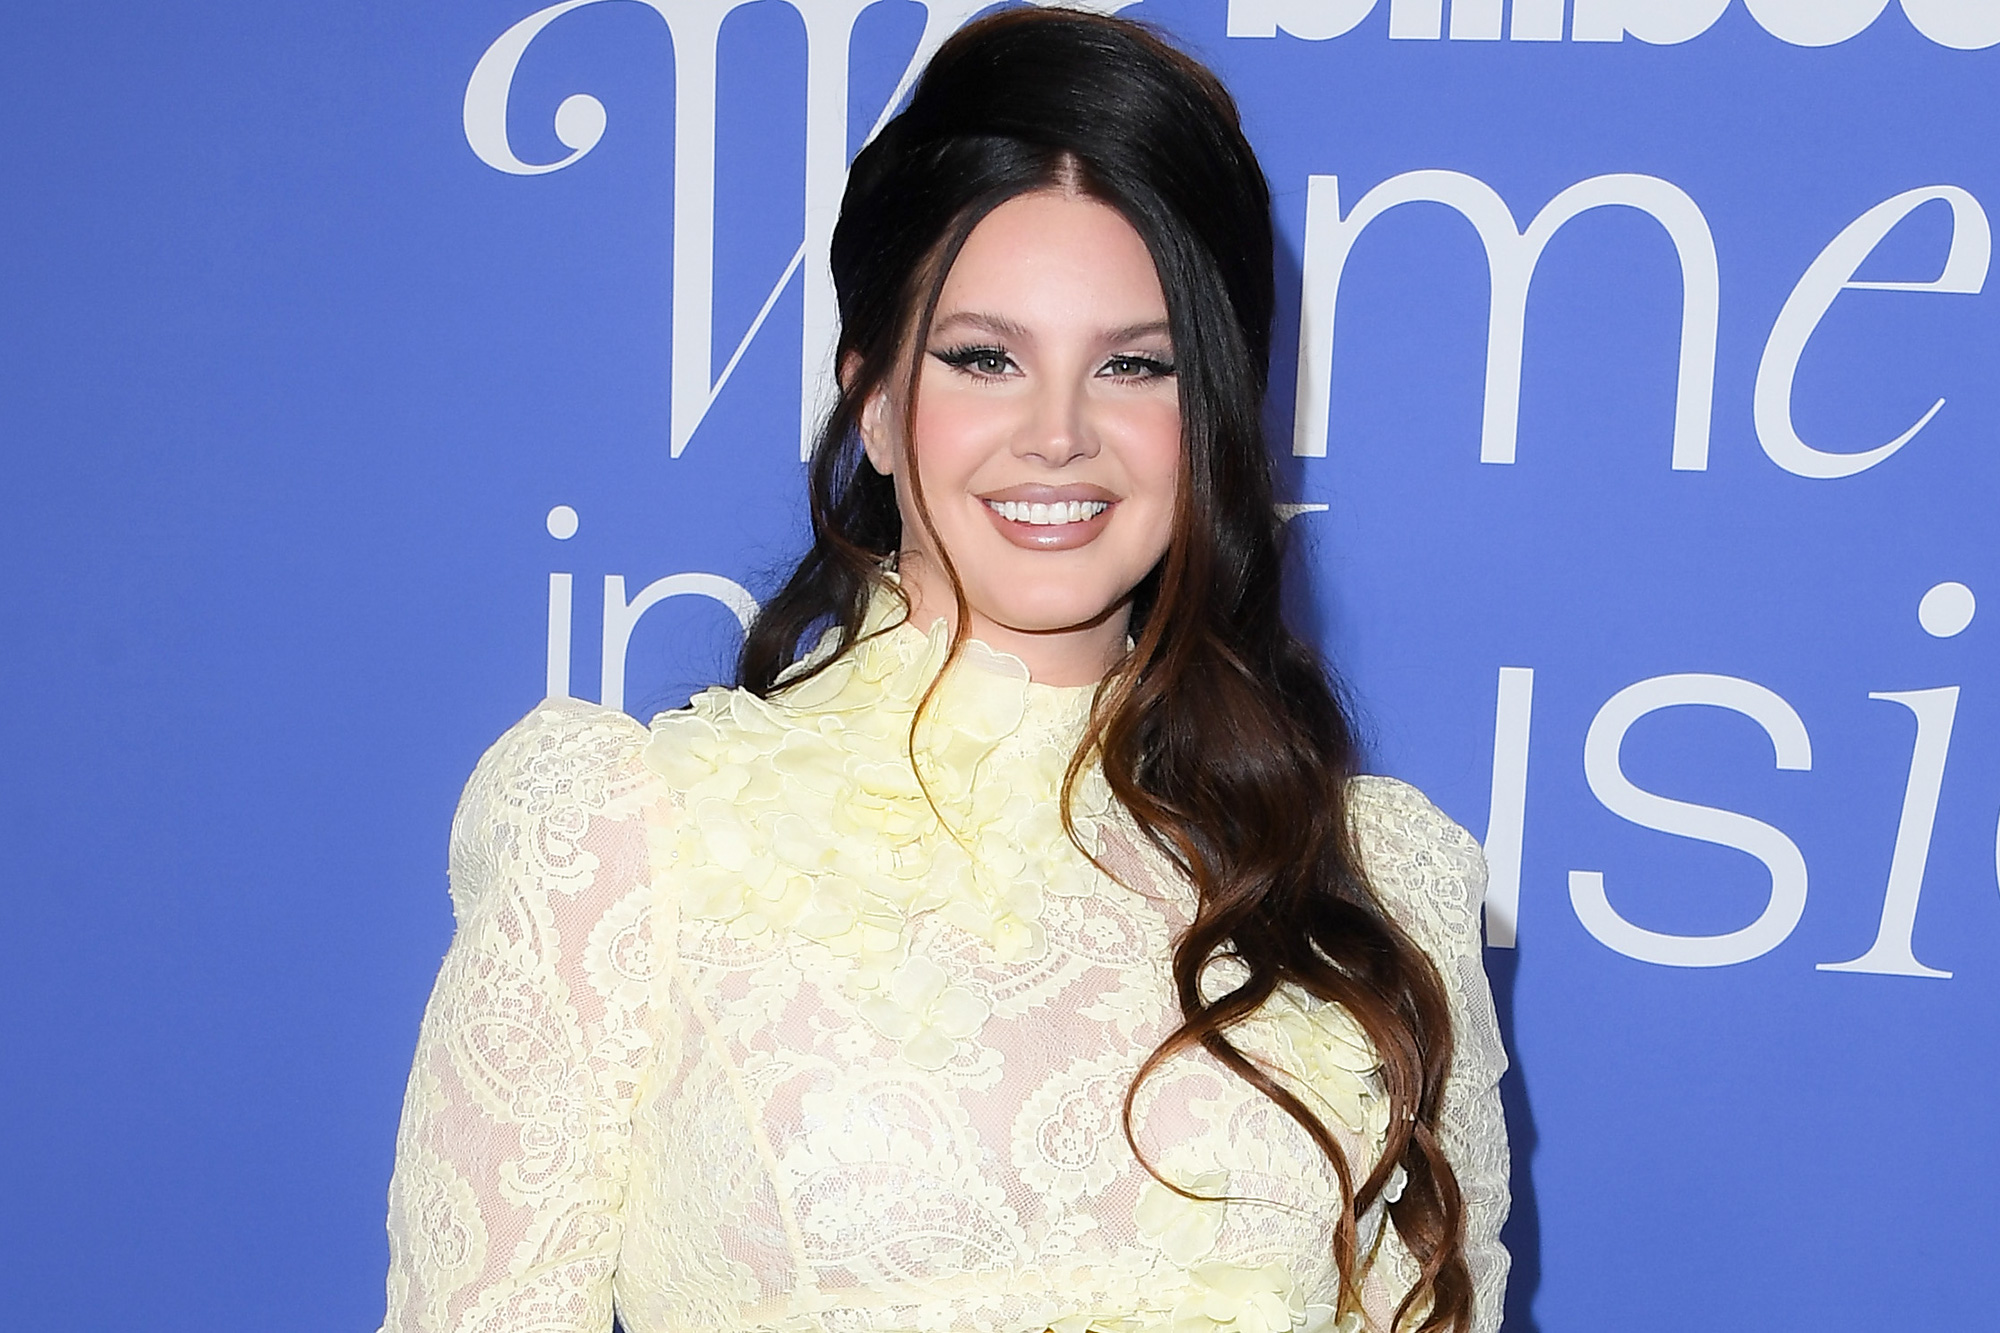 Lana Del Rey arrives at the 2023 Billboard Women In Music at YouTube Theater on March 01, 2023 in Inglewood, California